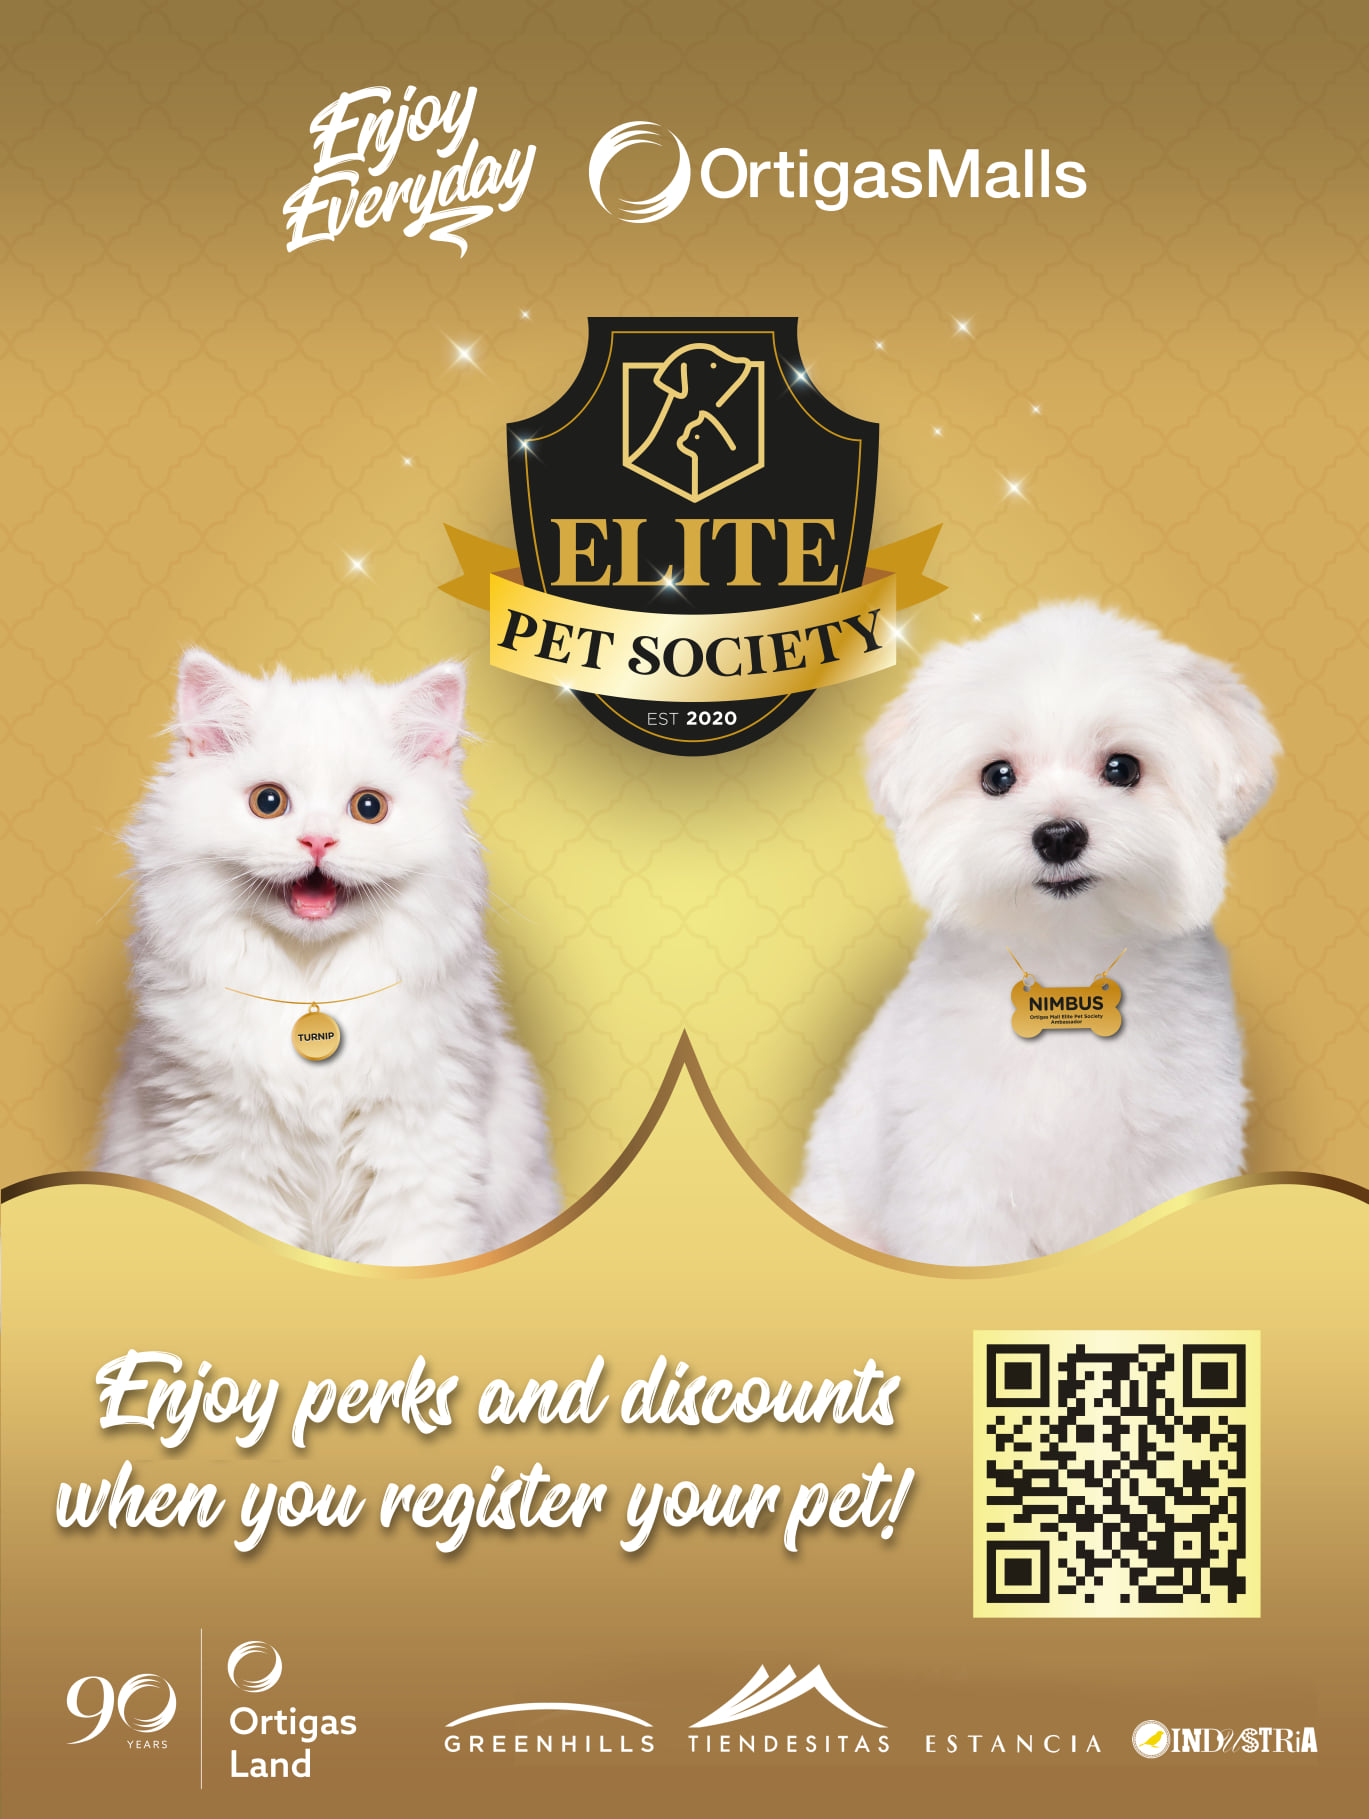 All The Paw-some Perks You Get When You Join Ortigas Malls Elite Pet Society